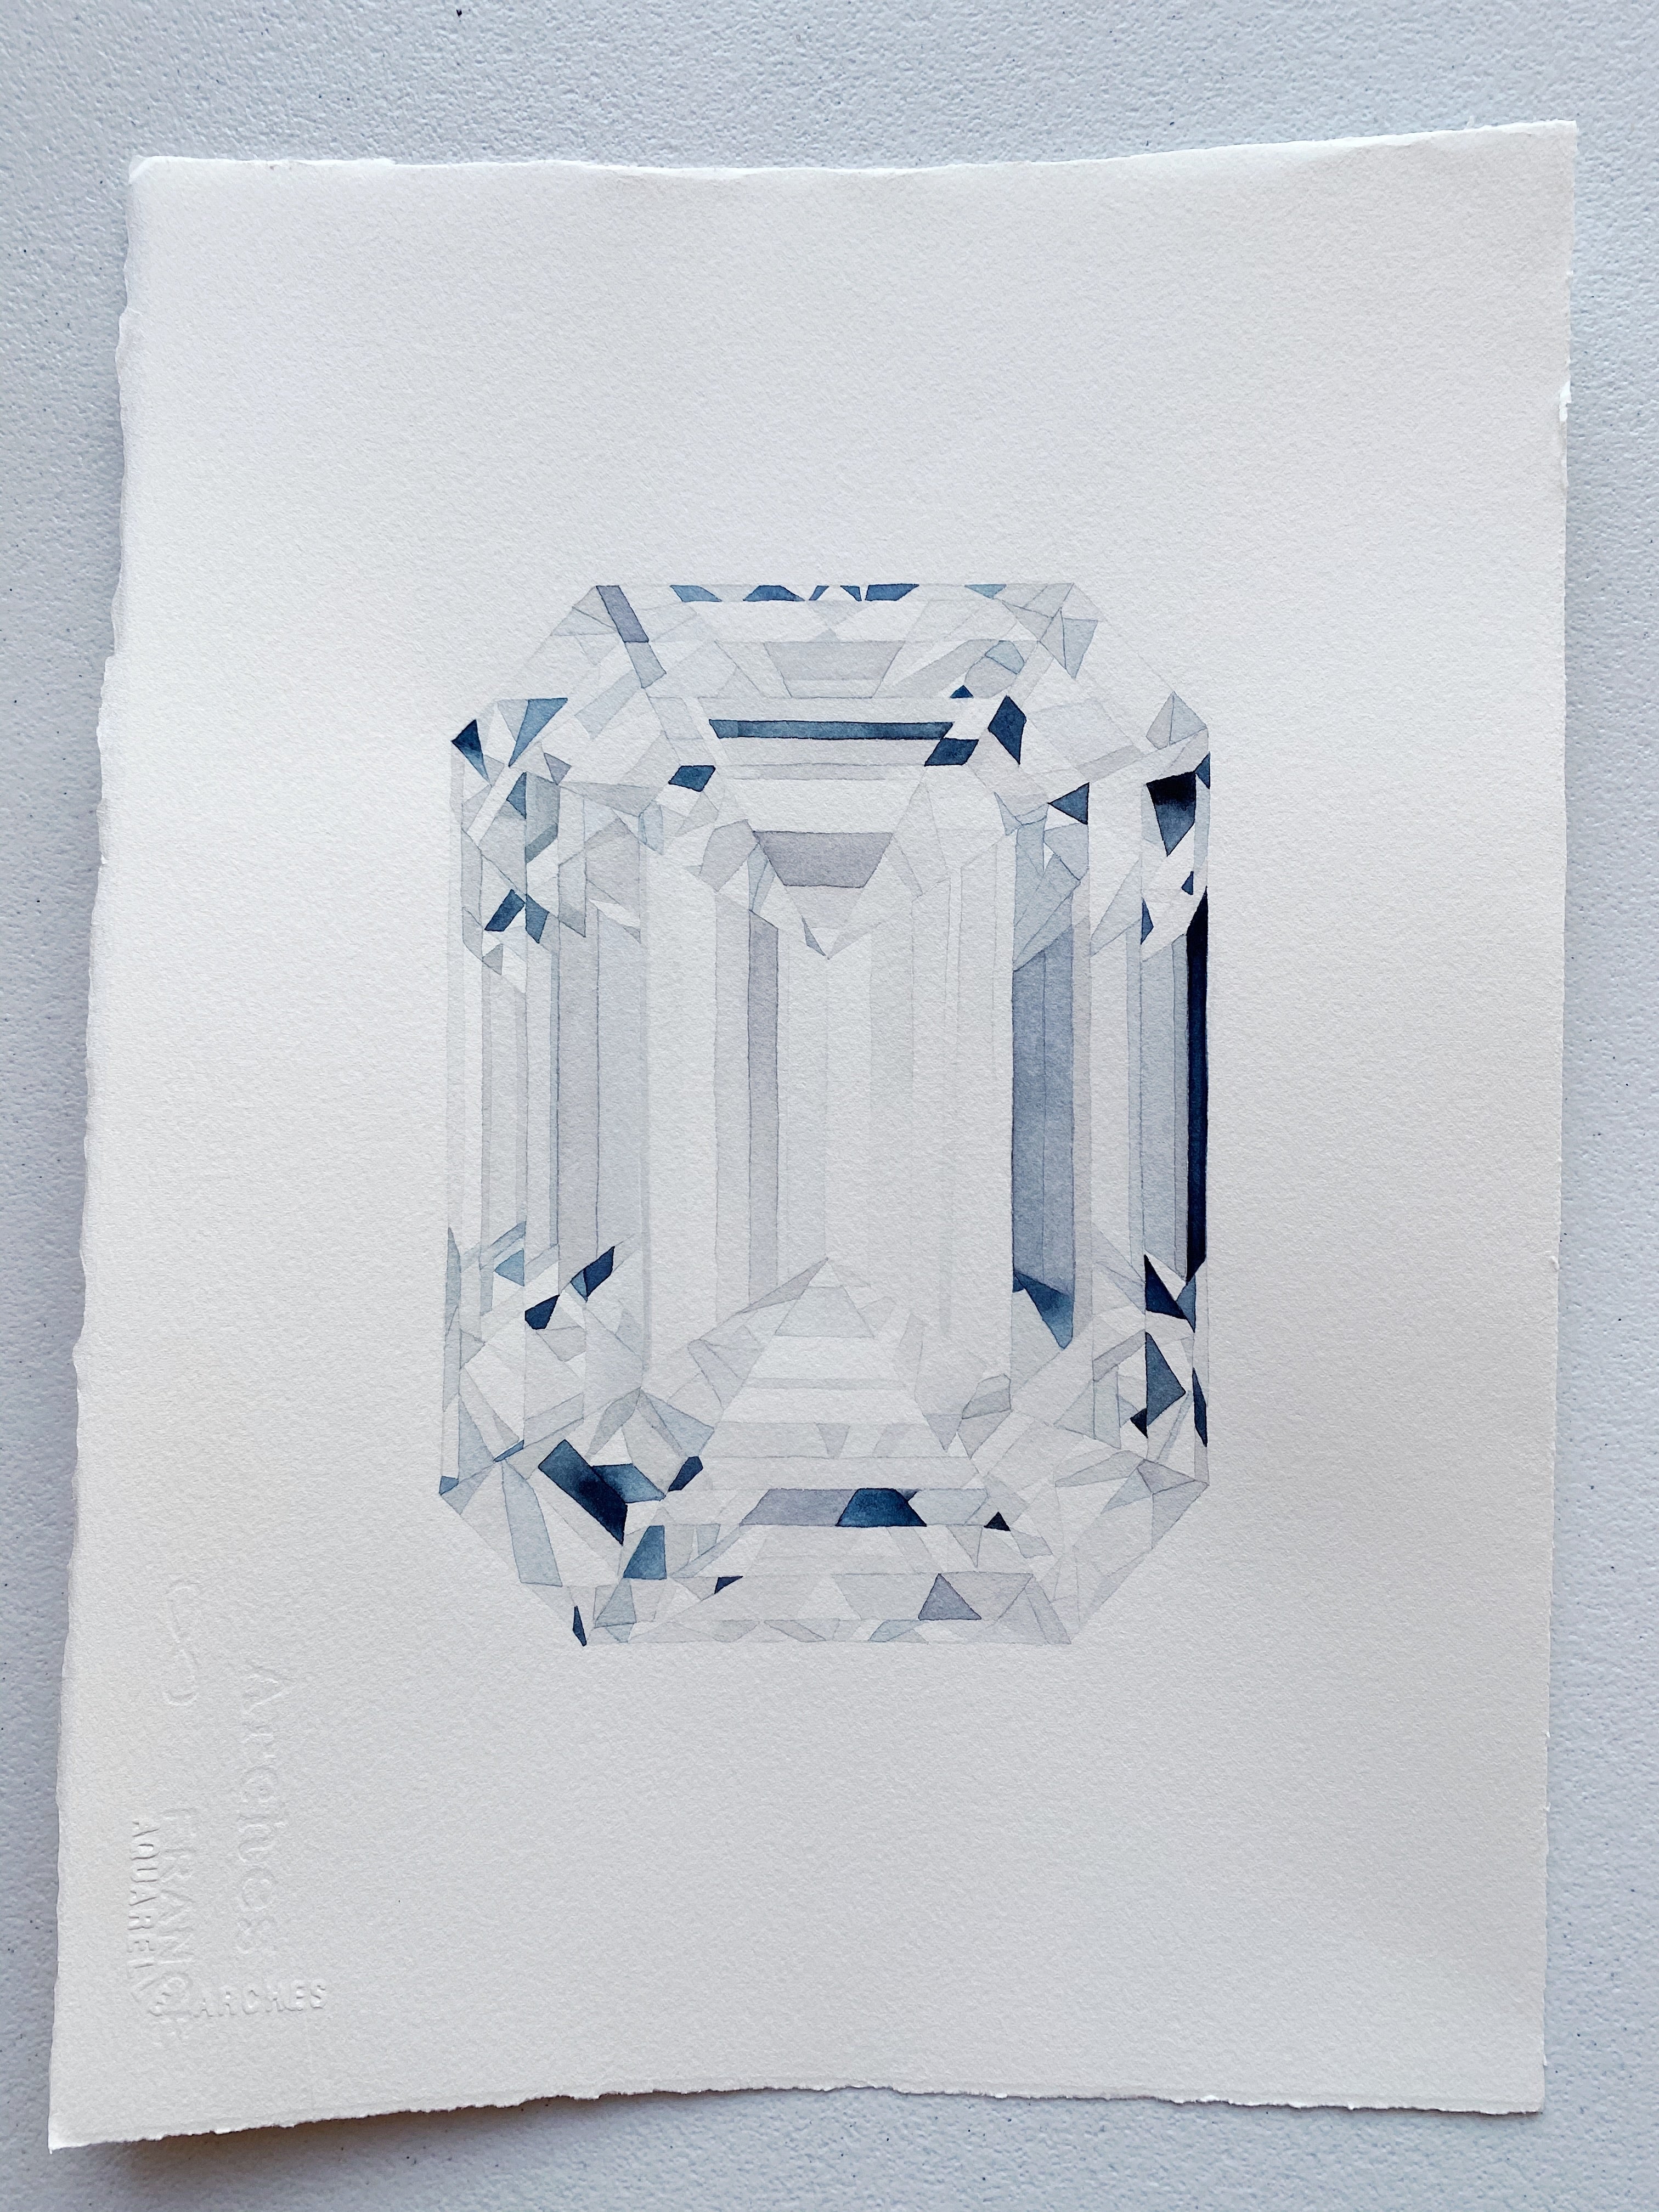 Original Painting - Watercolor Emerald Cut Diamond Painting 11x15 inches